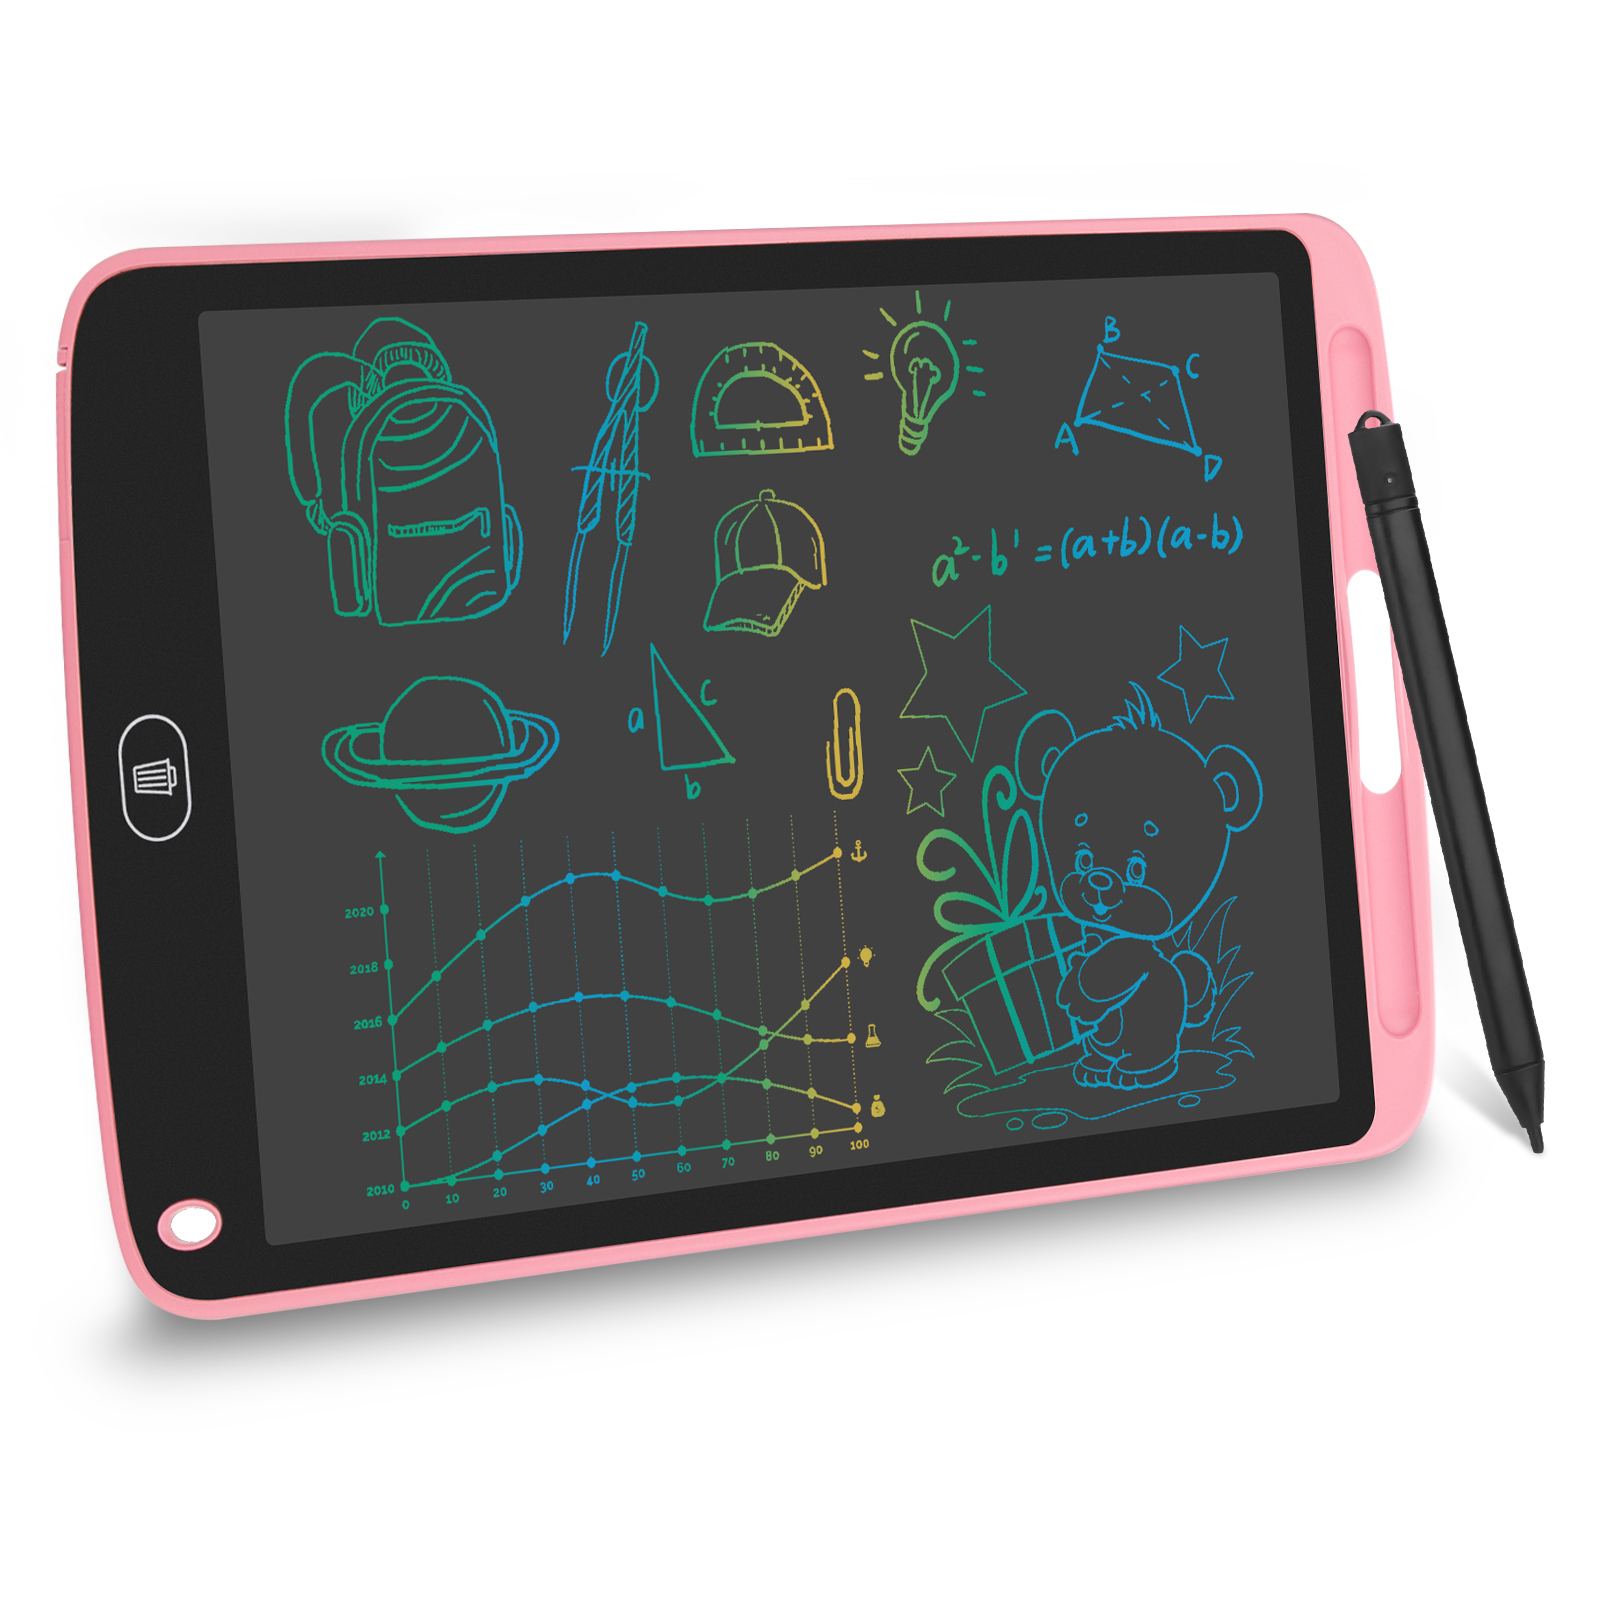 Color : Black 12inch LCD Writing Tablet,Electronic Writing &Drawing Board for Home School Office DEALPEAK 8.5 Inch/12 Inch Paperless Handwriting Drawing Tablet 